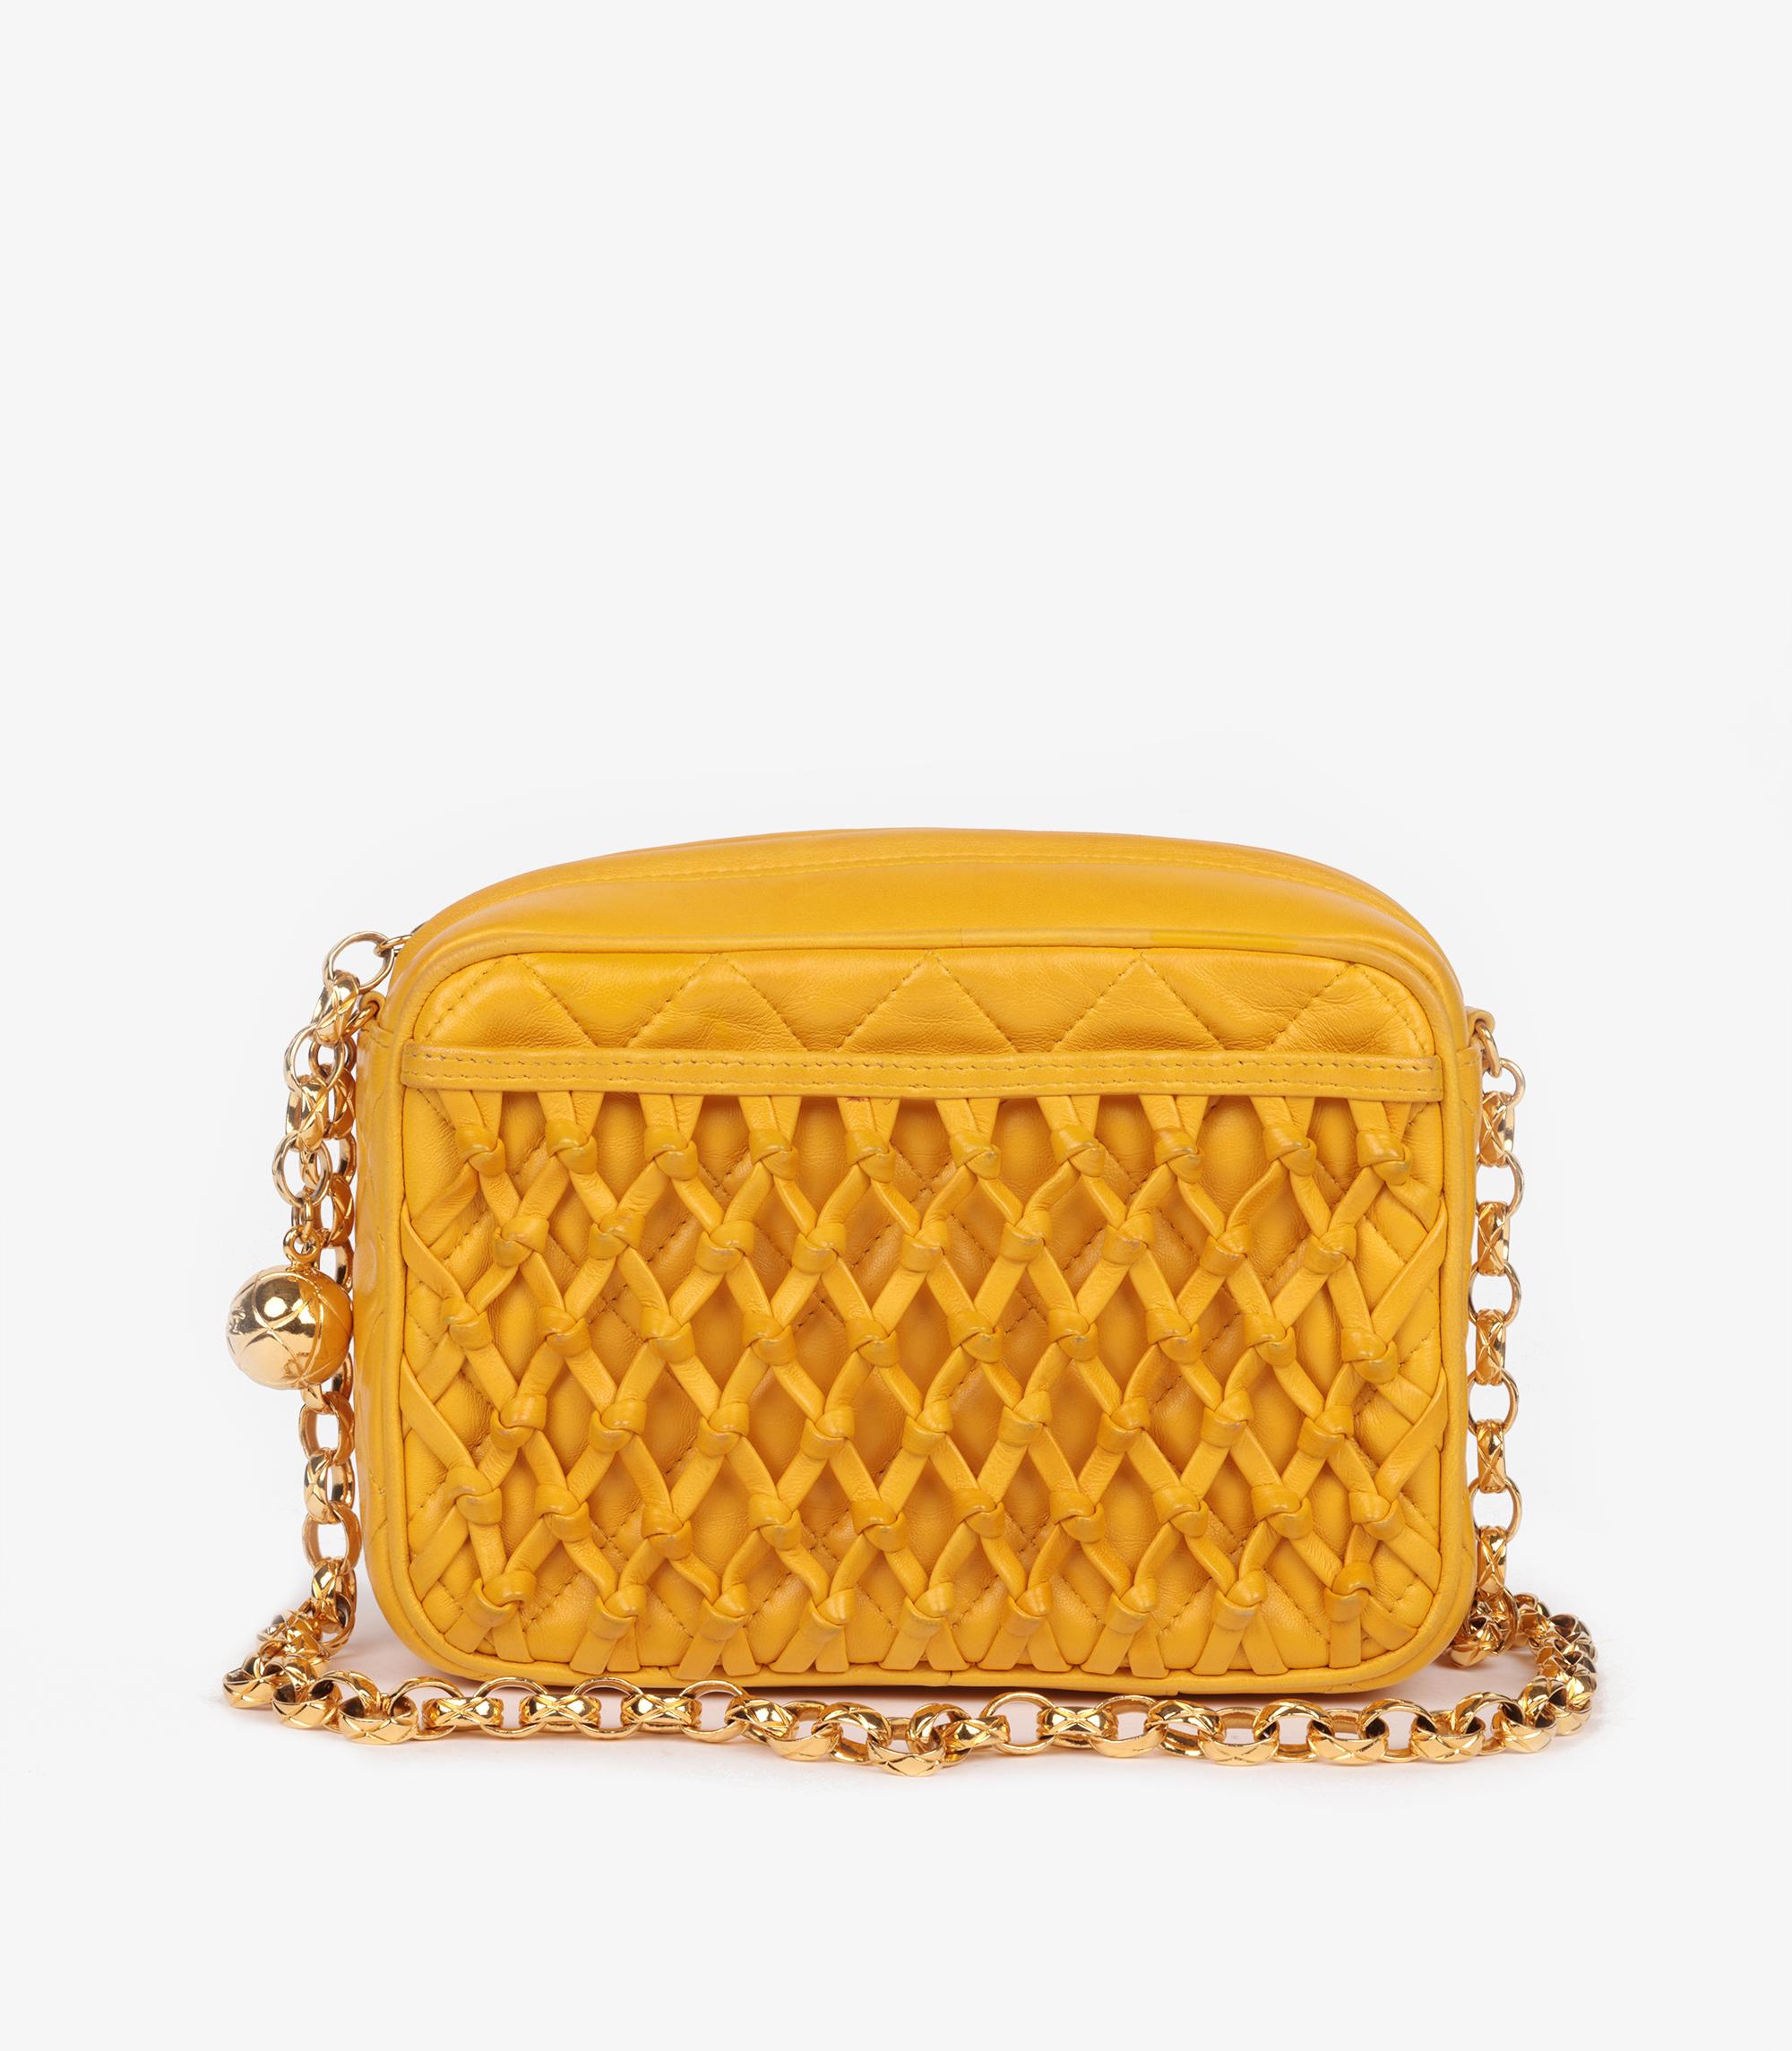 Chanel Yellow Quilted Lambskin Vintage Mini Camera Bag

Brand- Chanel
Model- Mini Timeless Camera Bag
Product Type- Crossbody, Shoulder
Serial Number- 2312329
Age- Circa 1991
Accompanied By- Chanel Dust Bag, Authenticity Card
Colour-